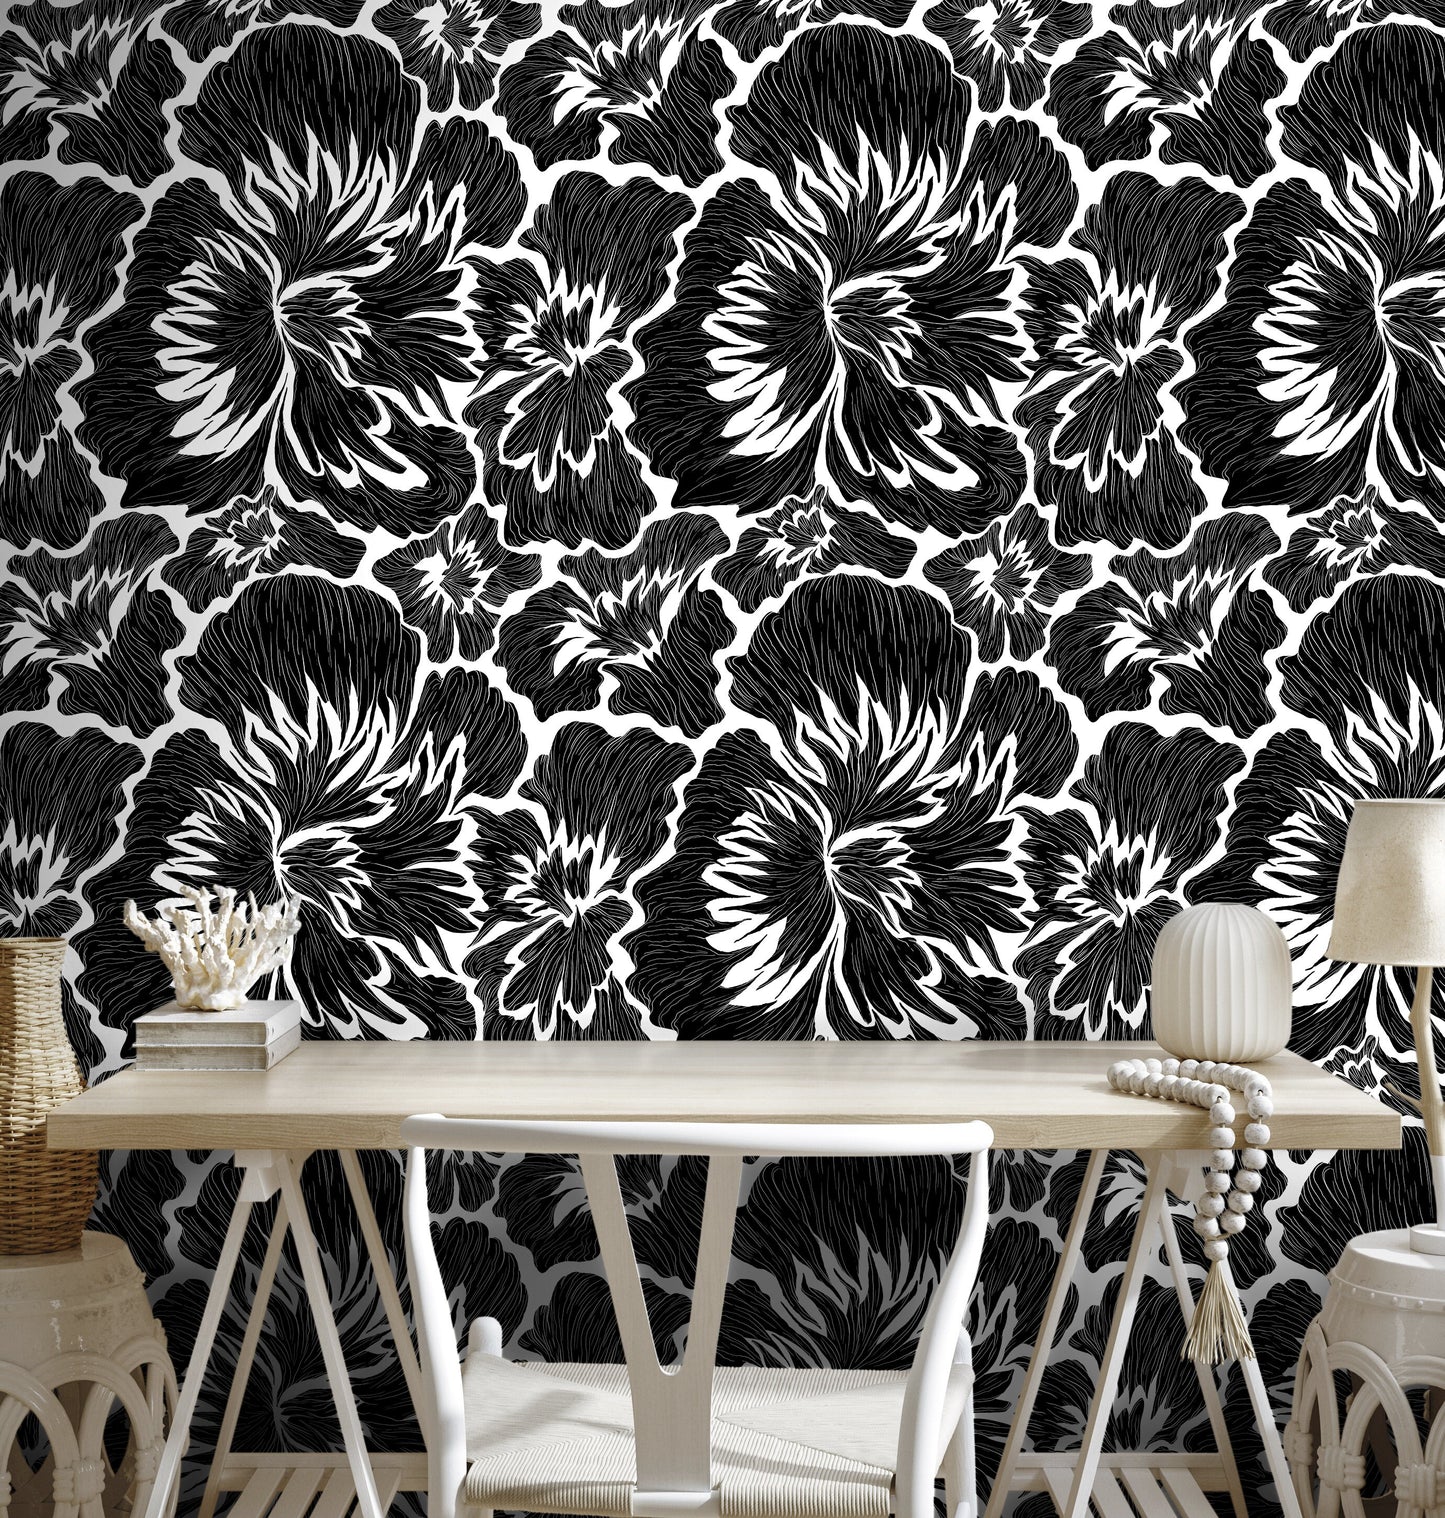 Black and White Bold Floral Wallpaper / Peel and Stick Wallpaper Removable Wallpaper Home Decor Wall Art Wall Decor Room Decor - C677